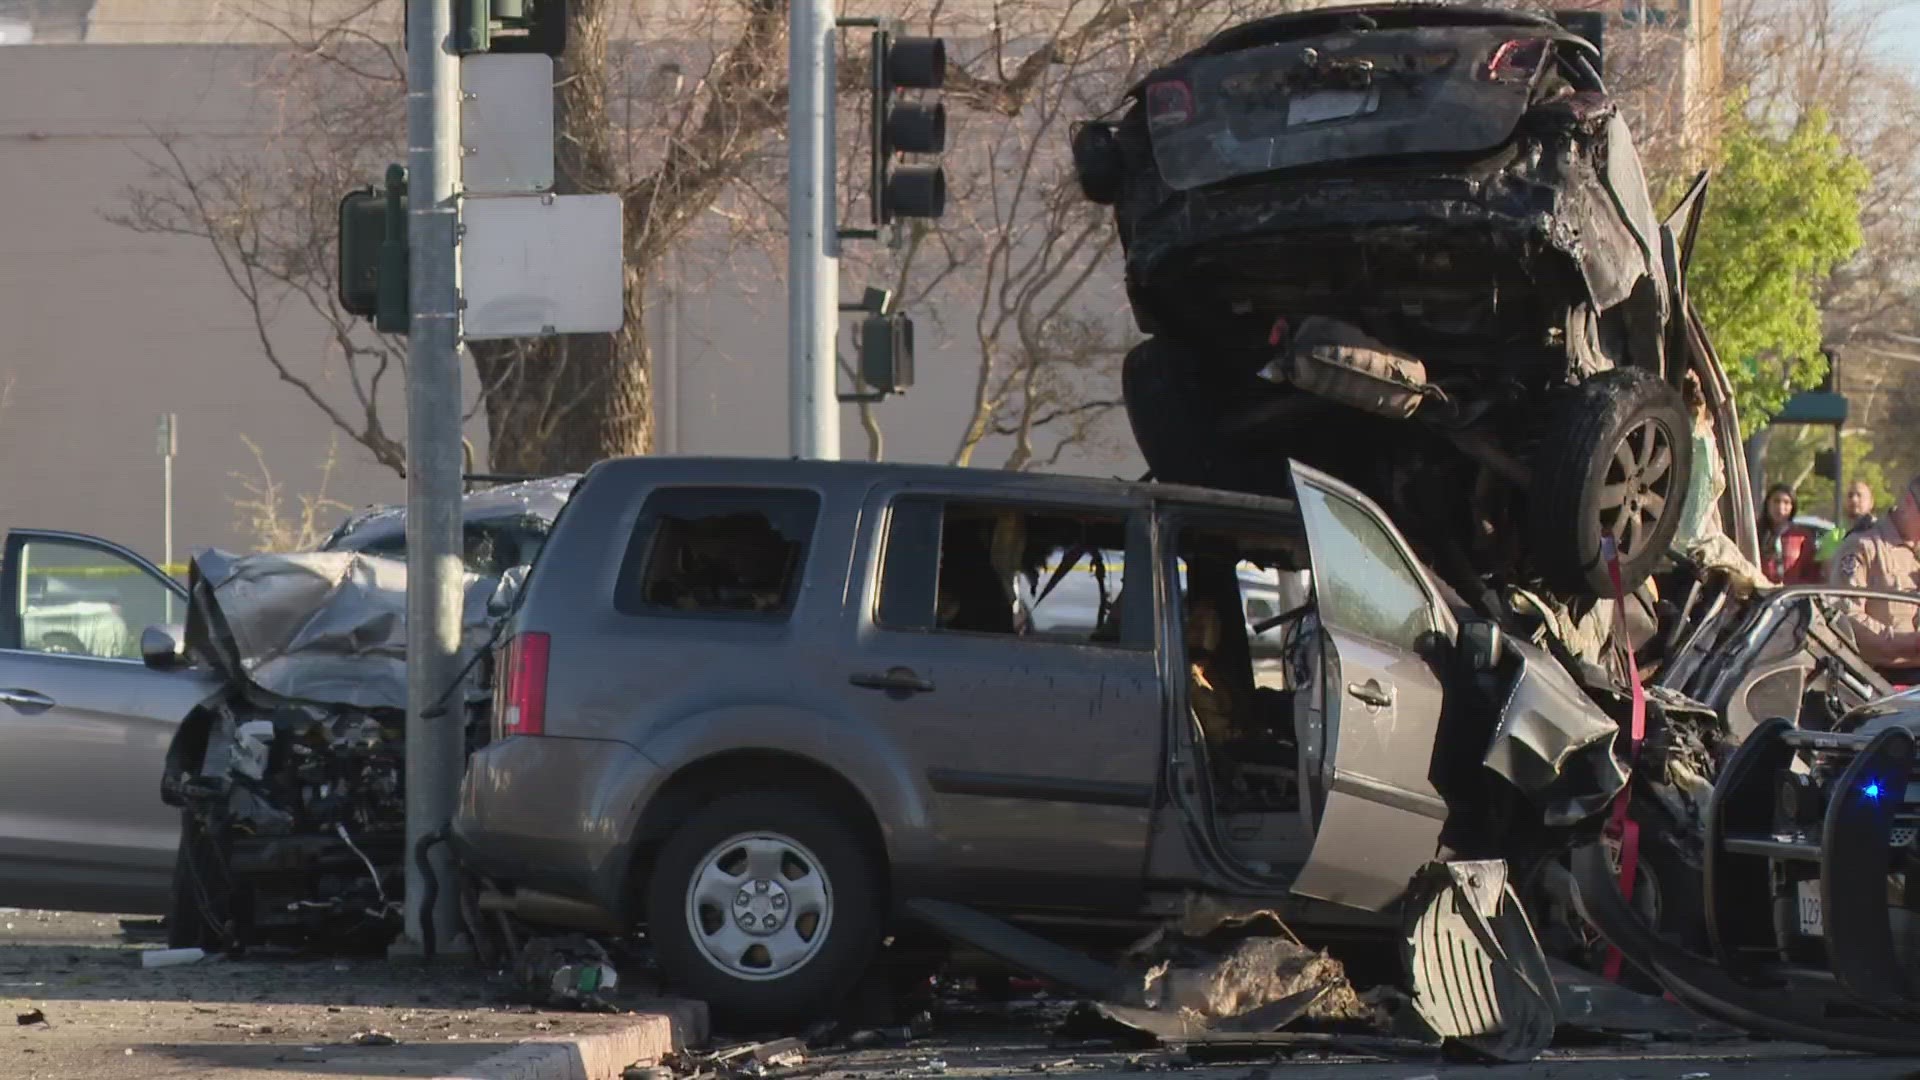 Officials say the crash started after a car was seen by an officer "driving erratically" through downtown Woodland.